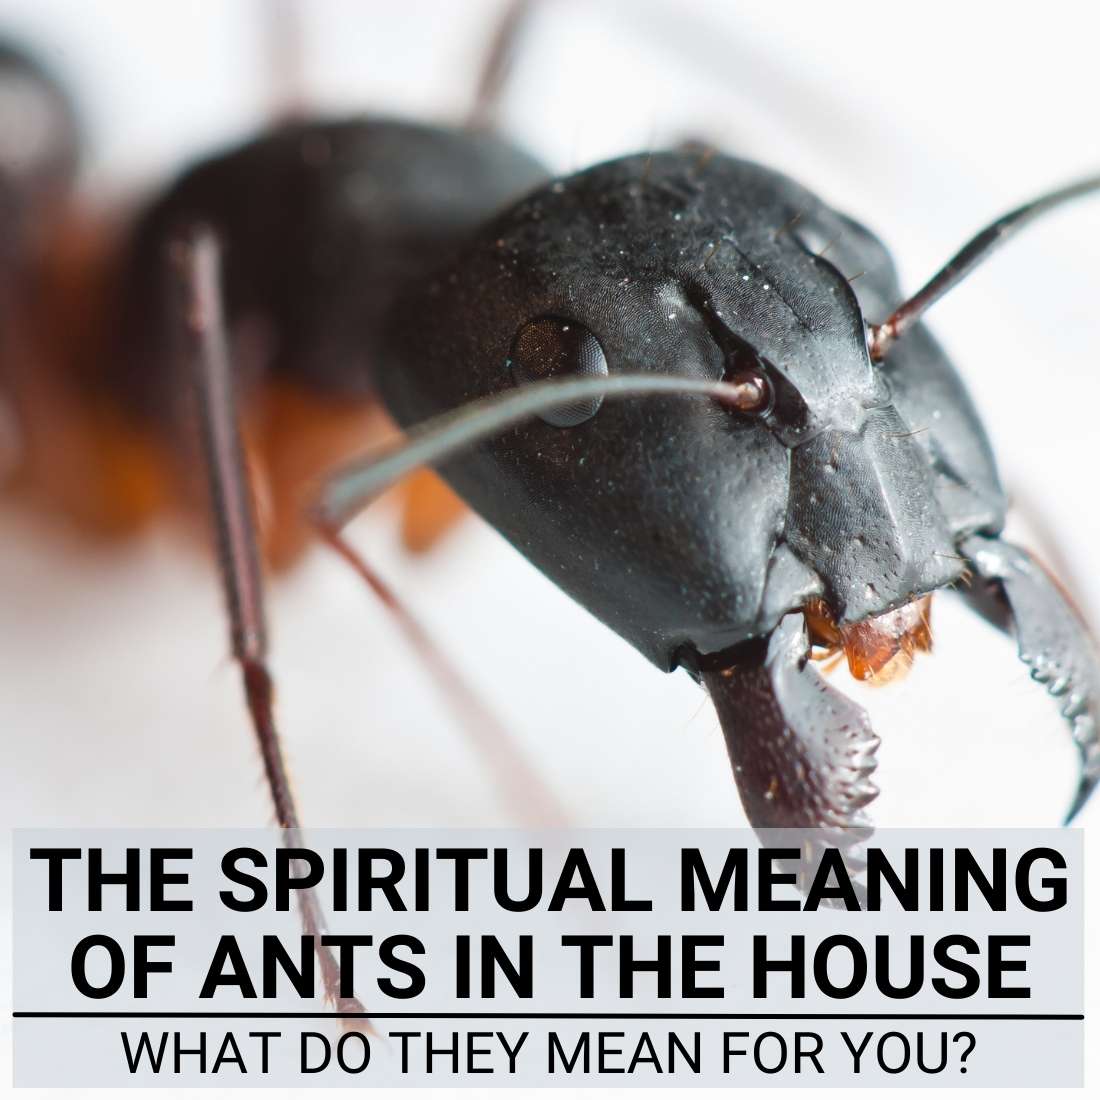 The Spiritual Meaning Of Ants In The House: What Do They Mean For You?